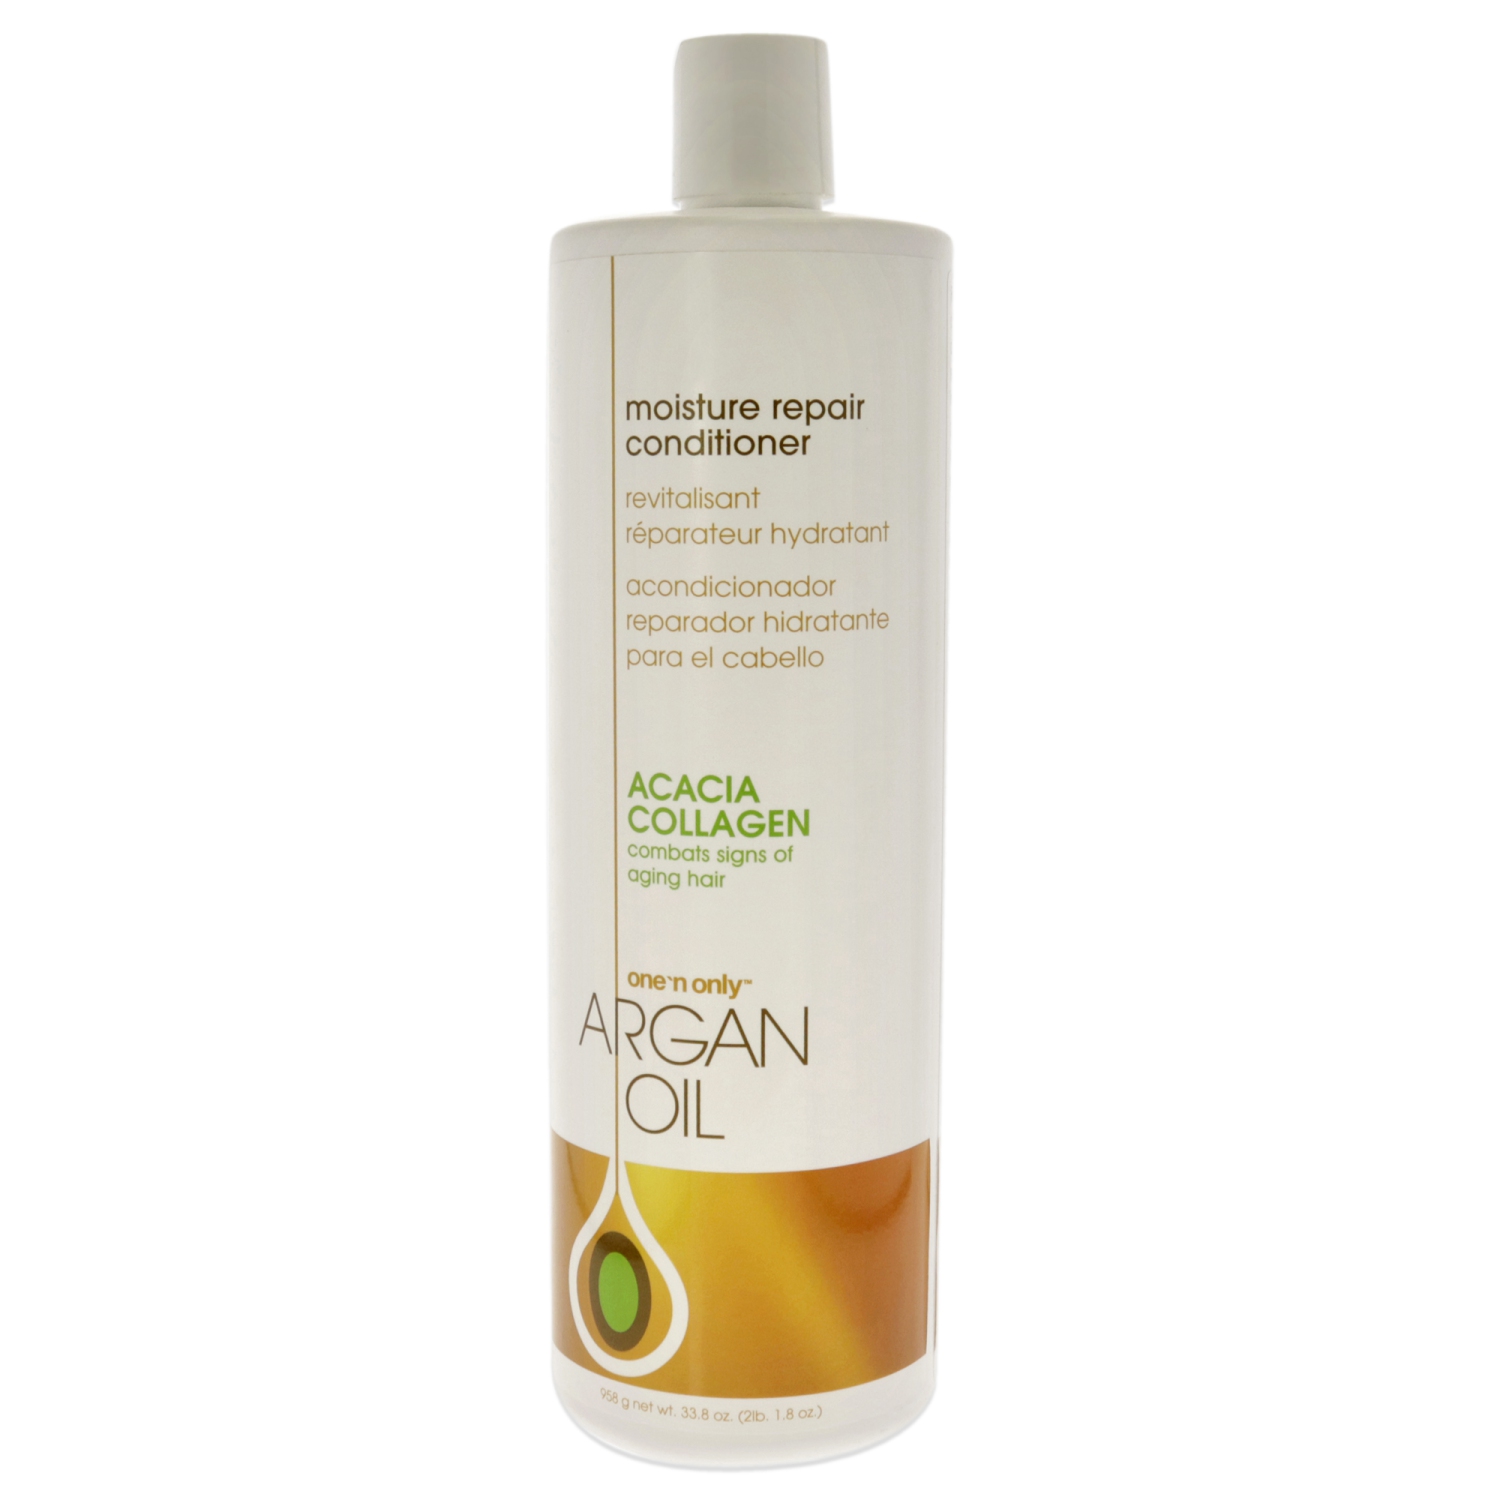 Argan Oil Moisture Acacia Collagen Repair Conditioner by One n Only for Unisex - 33.8 oz Conditioner